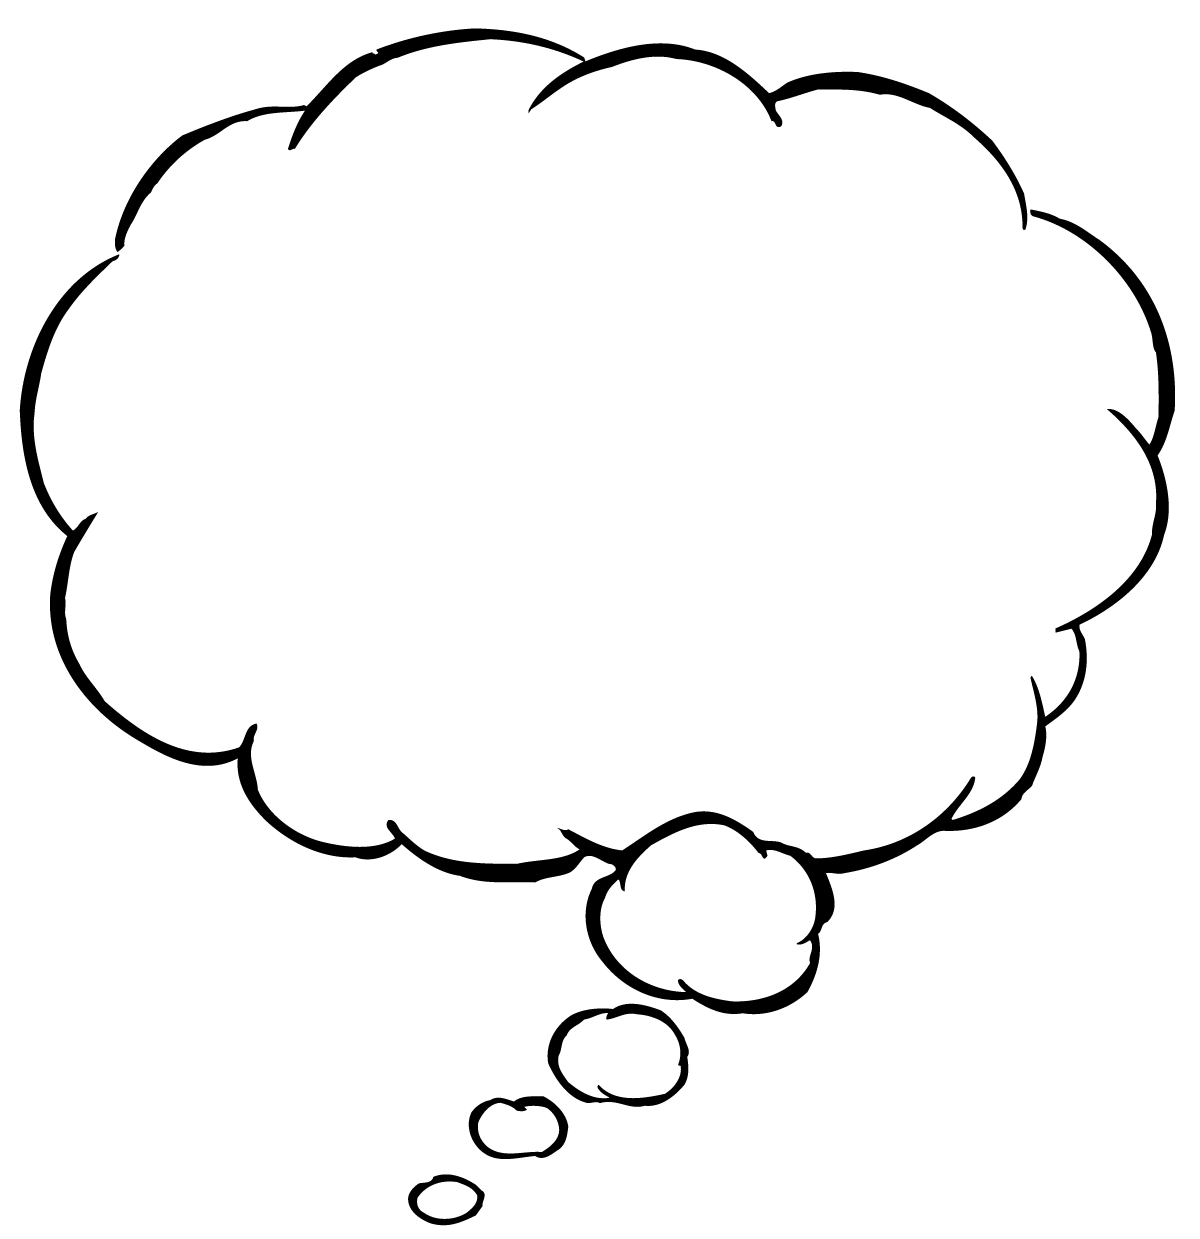 Cloud thought bubble clipart free to use clip art resource - Clipartix